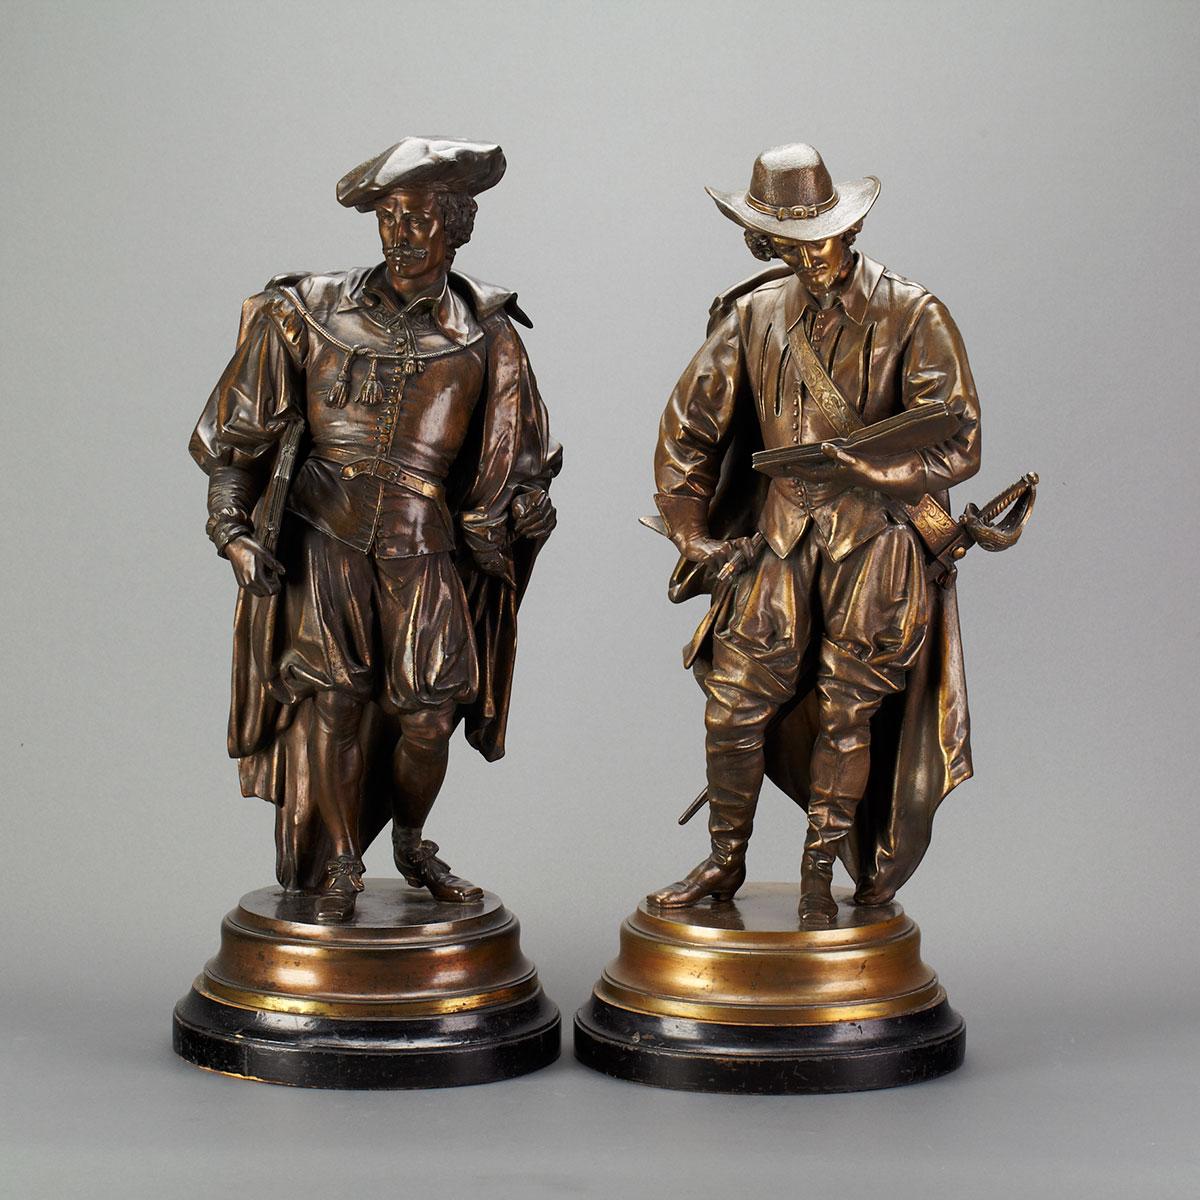 Pair of Large Victorian Patinated White Metal Figures of Renaissance Explorers, 19th century